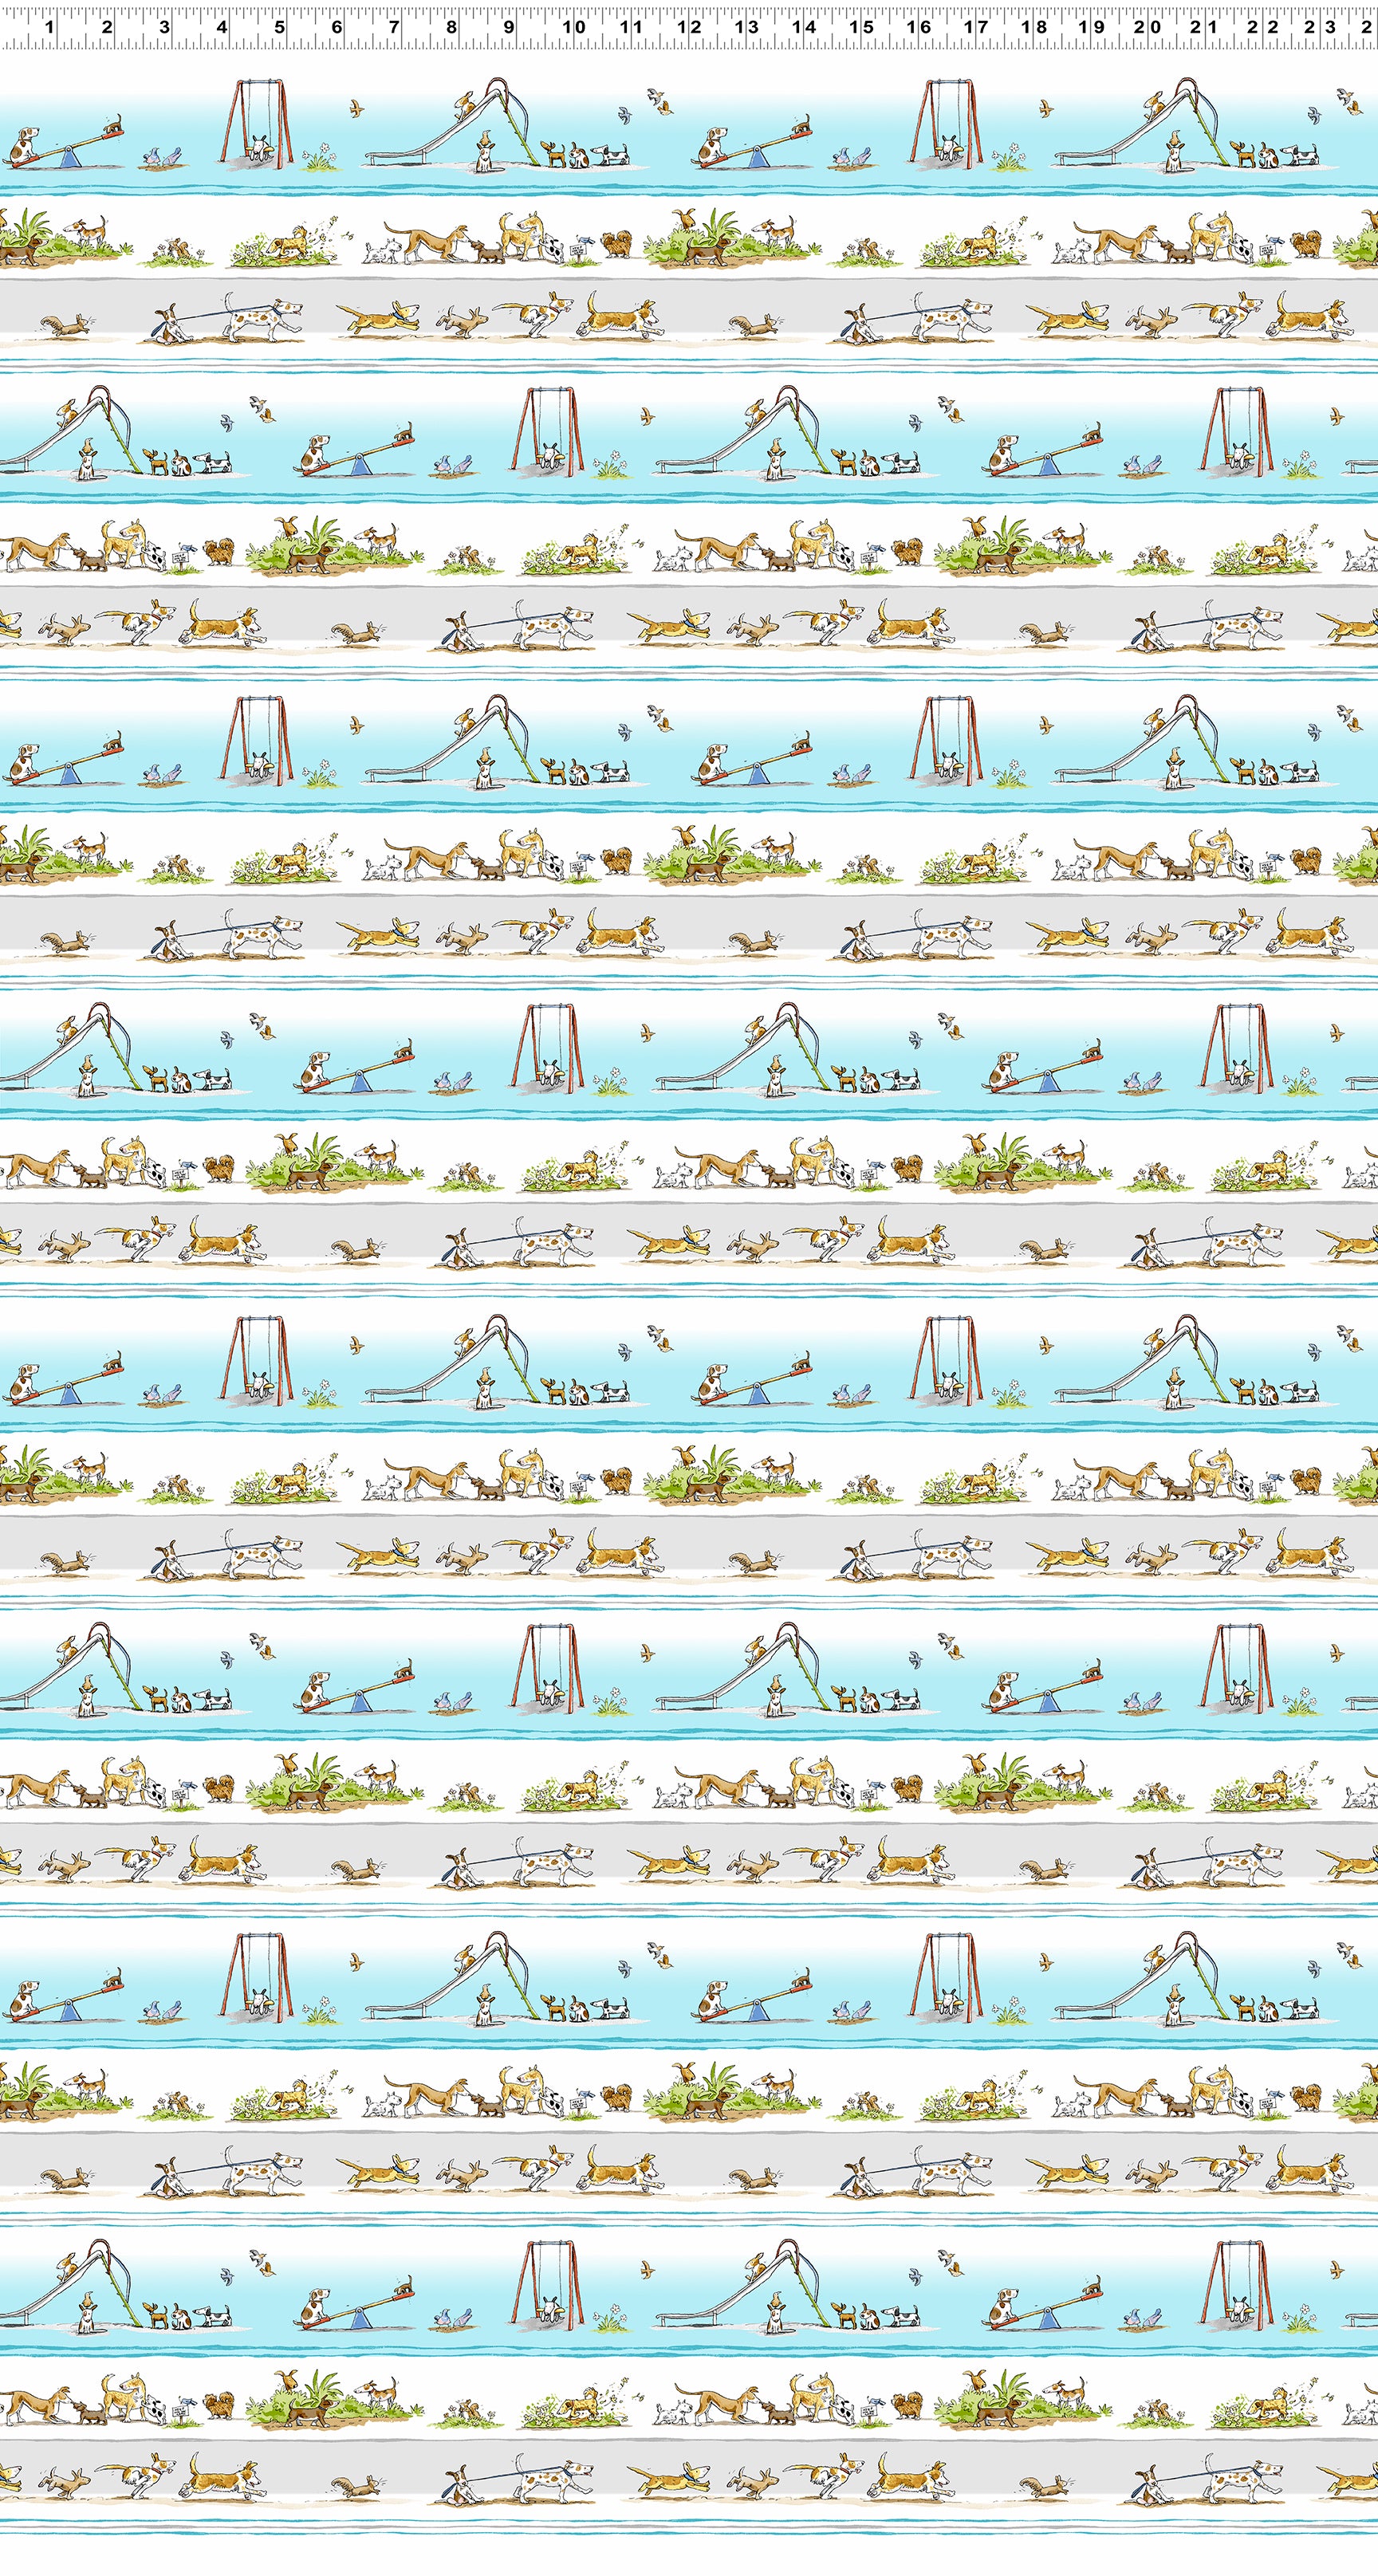 A Day at the Park Quilt Fabric - Dogs Pictorial Stripe in Light Pool Blue/Multi - Y3876-123